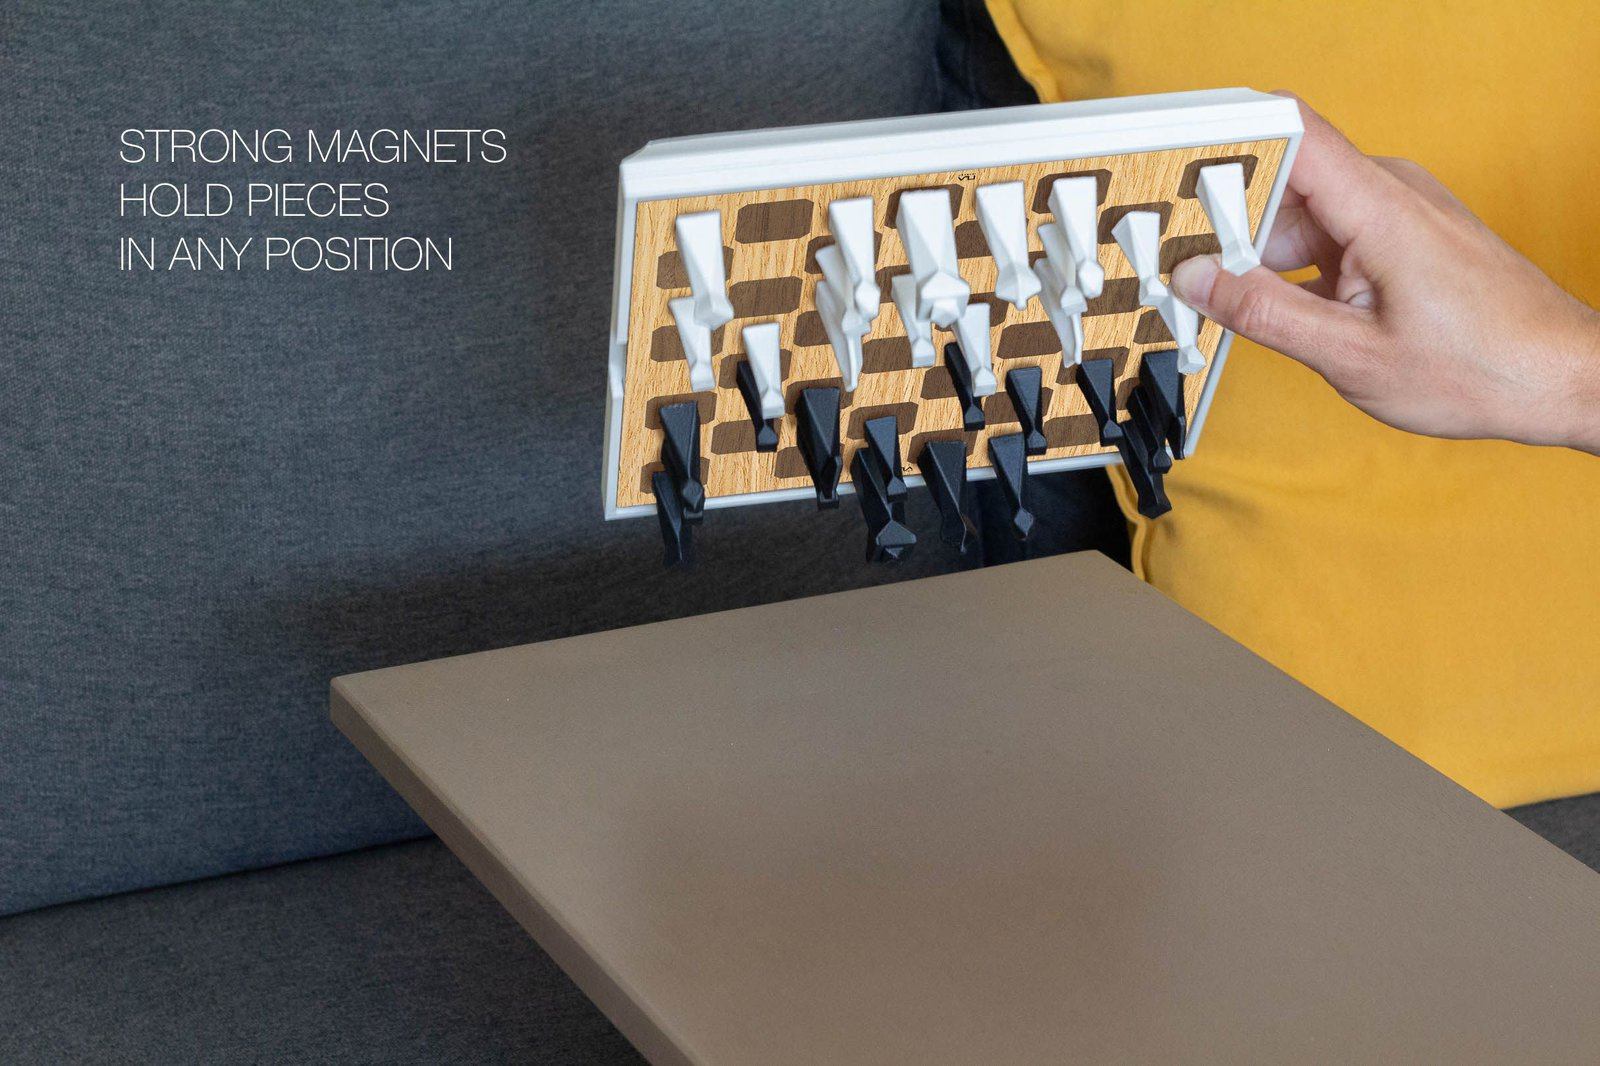 Personalized Magnetic Travel Chess Set, Modern Chess Set, Minimalist Unique Chess Set with Board, Birthday Gift, 3D Printed Chess Pieces